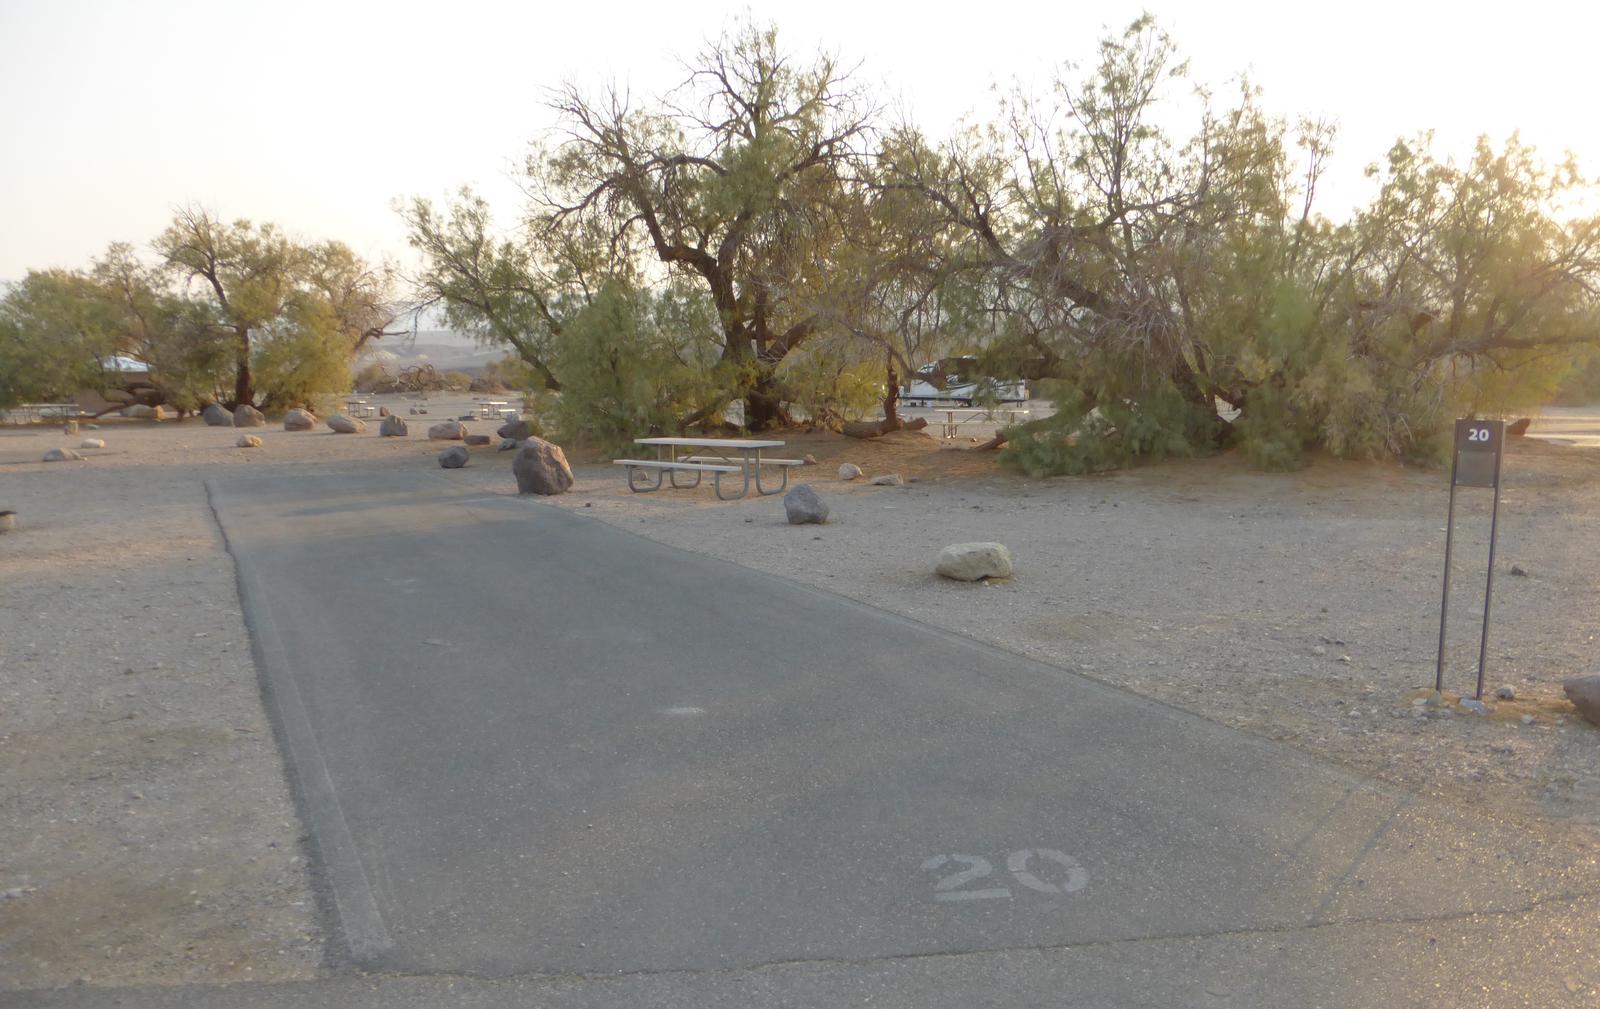 Furnace Creek Campground standard nonelectric site #20 with picnic table and fire ring